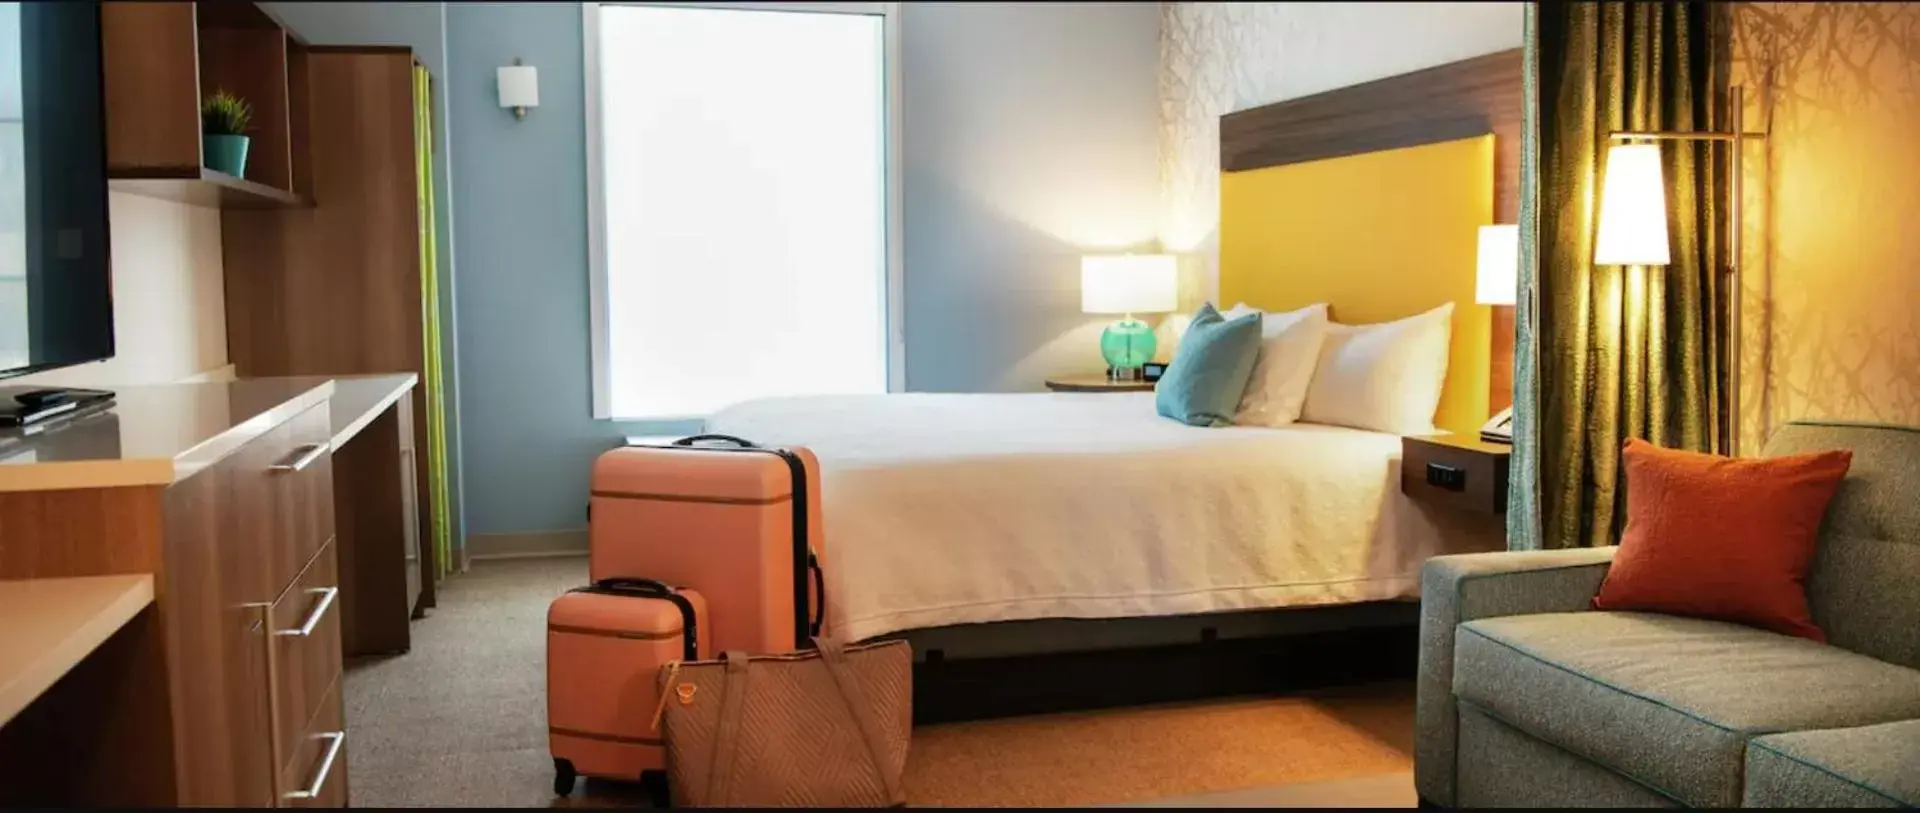 Bed in Home2 Suites by Hilton Dallas Medical District Lovefield